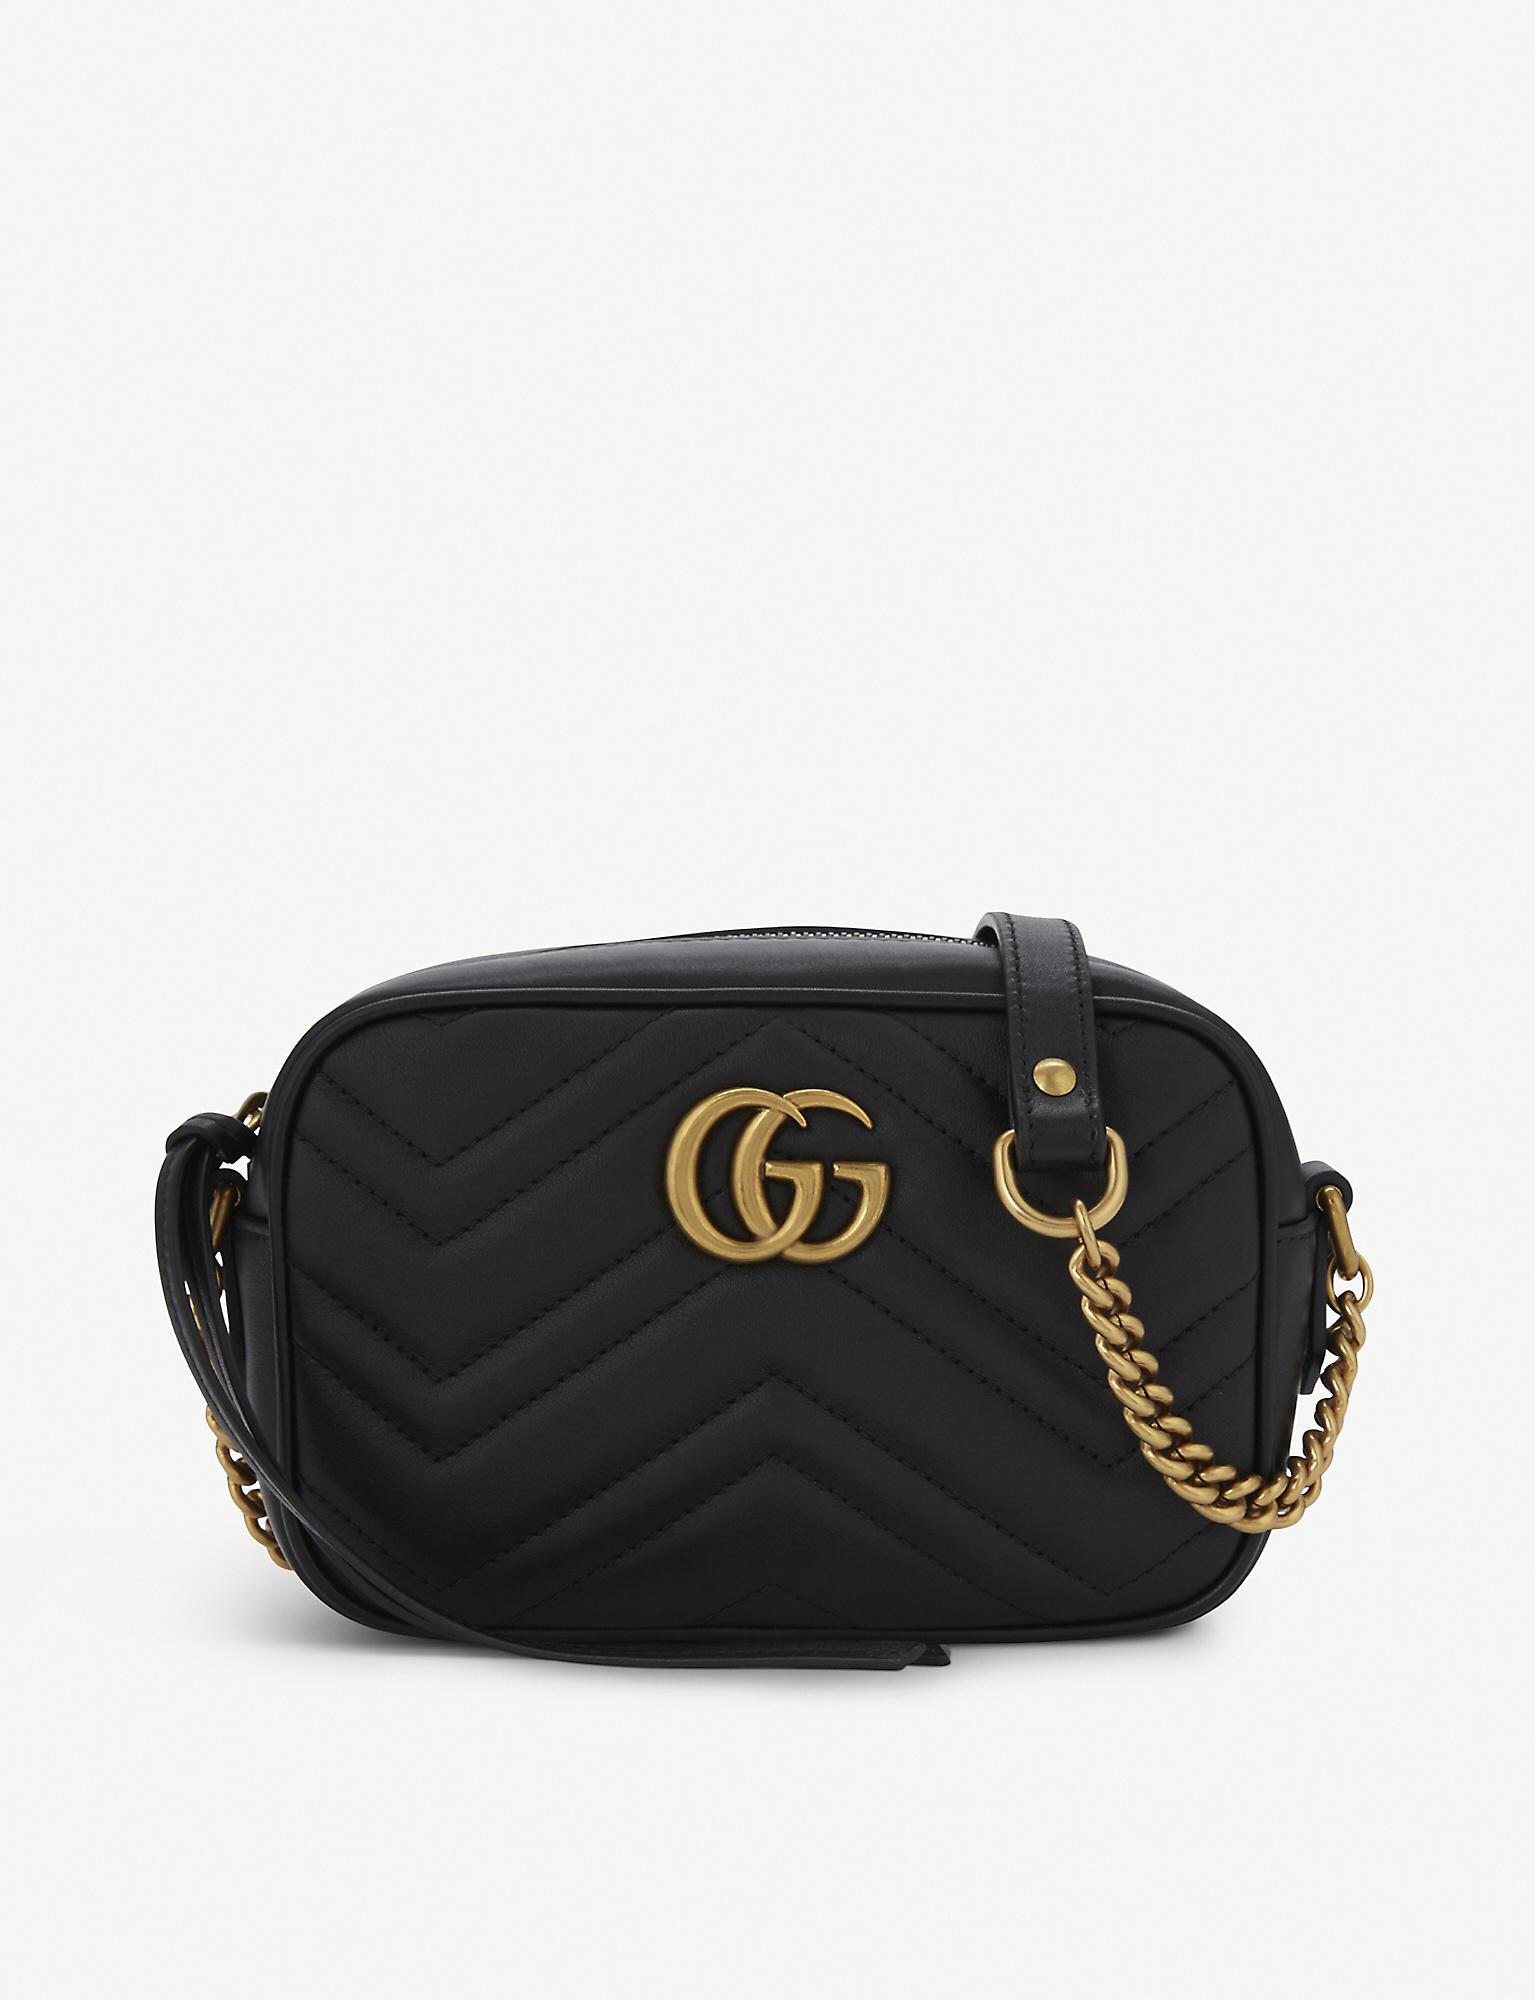 Gucci GG Marmont Mini Quilted Leather Cross-Body Bag in Black - Lyst